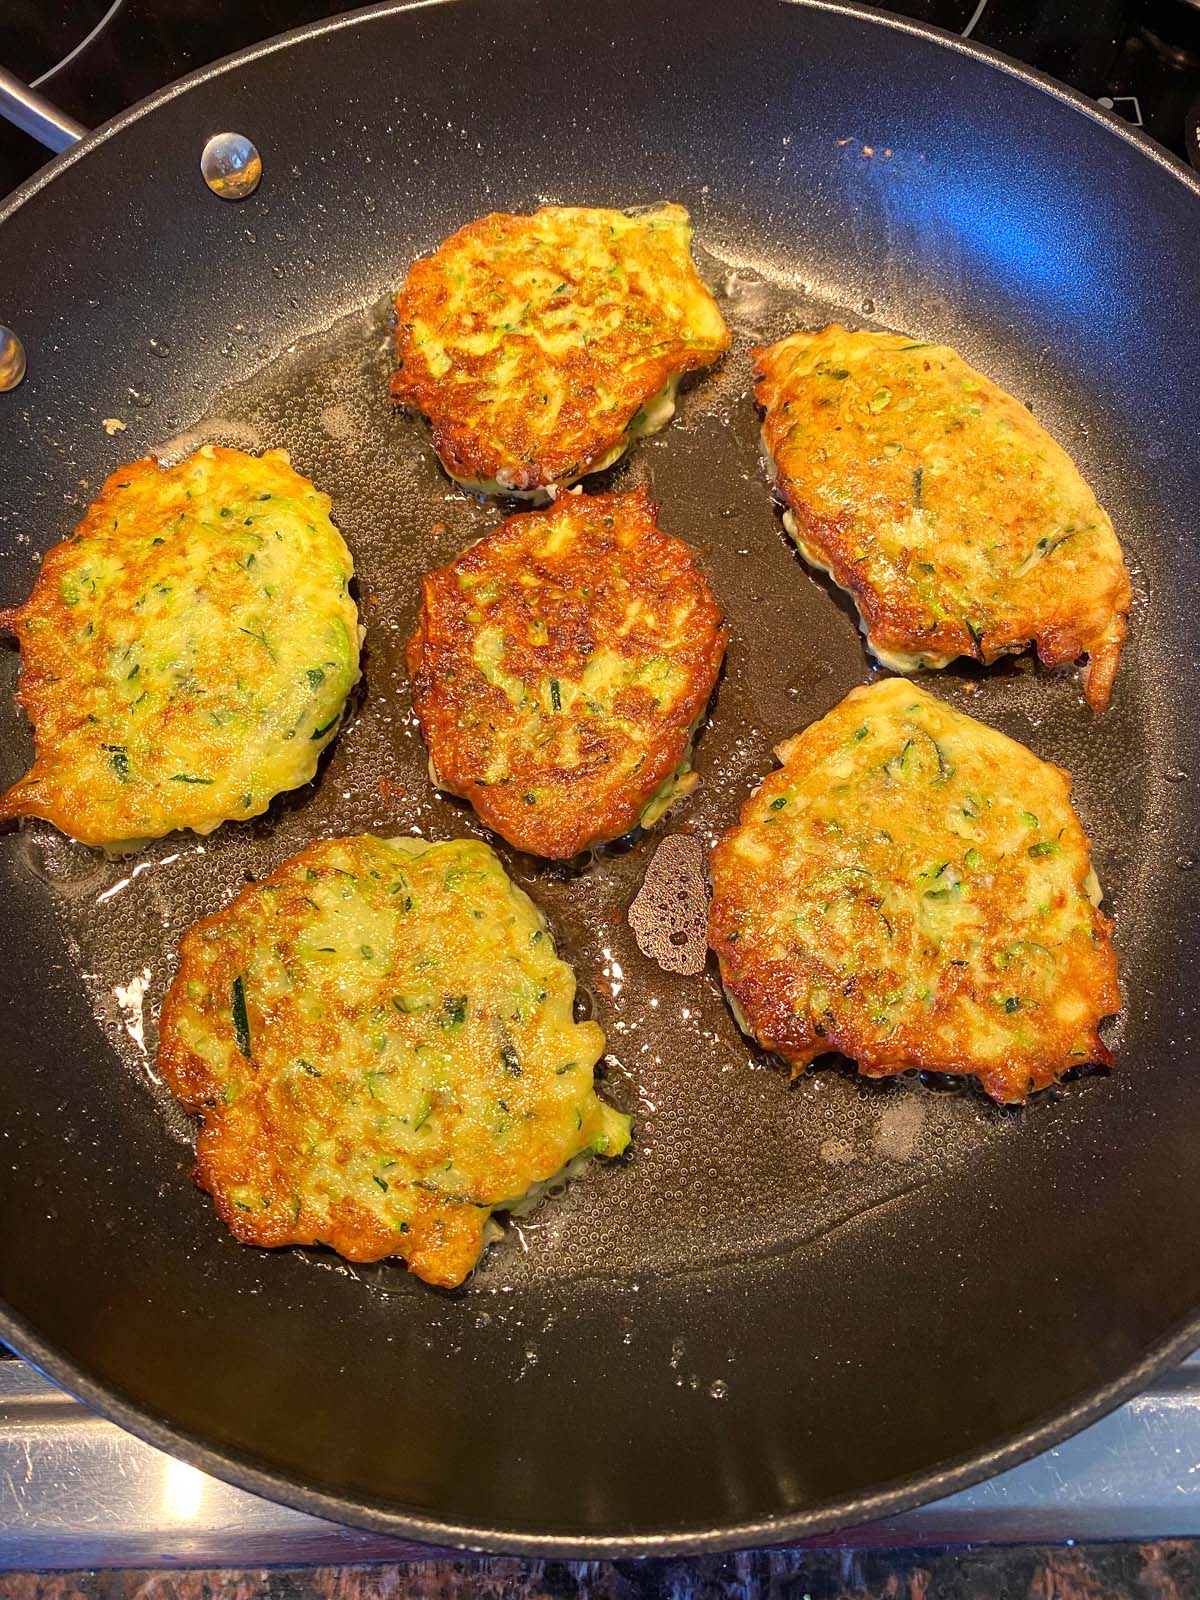 Zucchini pancakes being cooked in a frying pan.